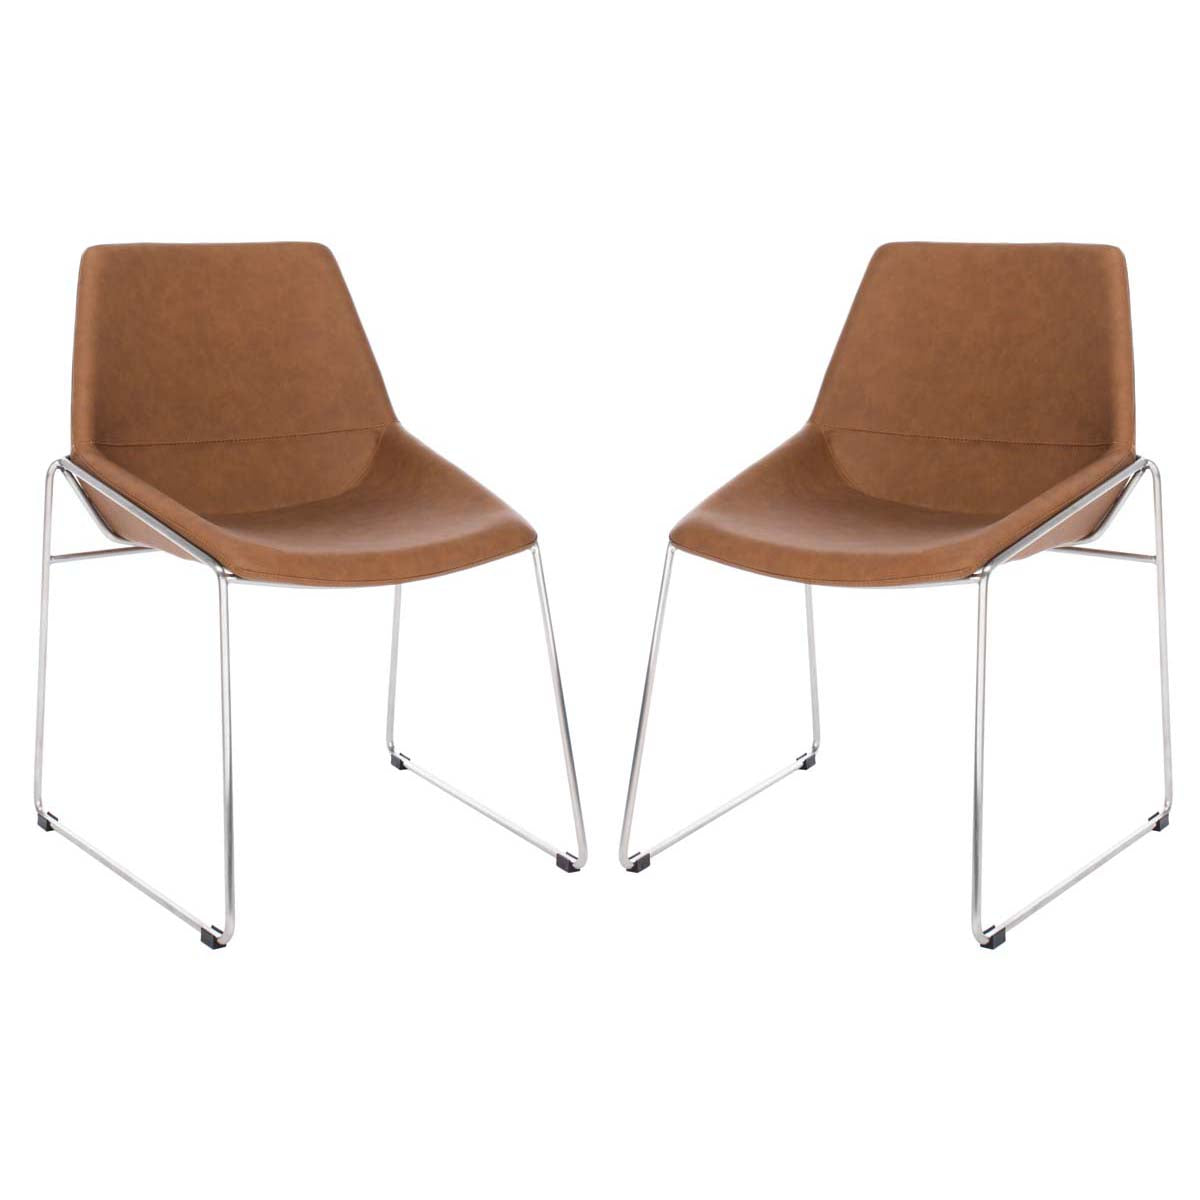 Safavieh Alexis Mid Century Dining Chair (Set of 2), DCH3000